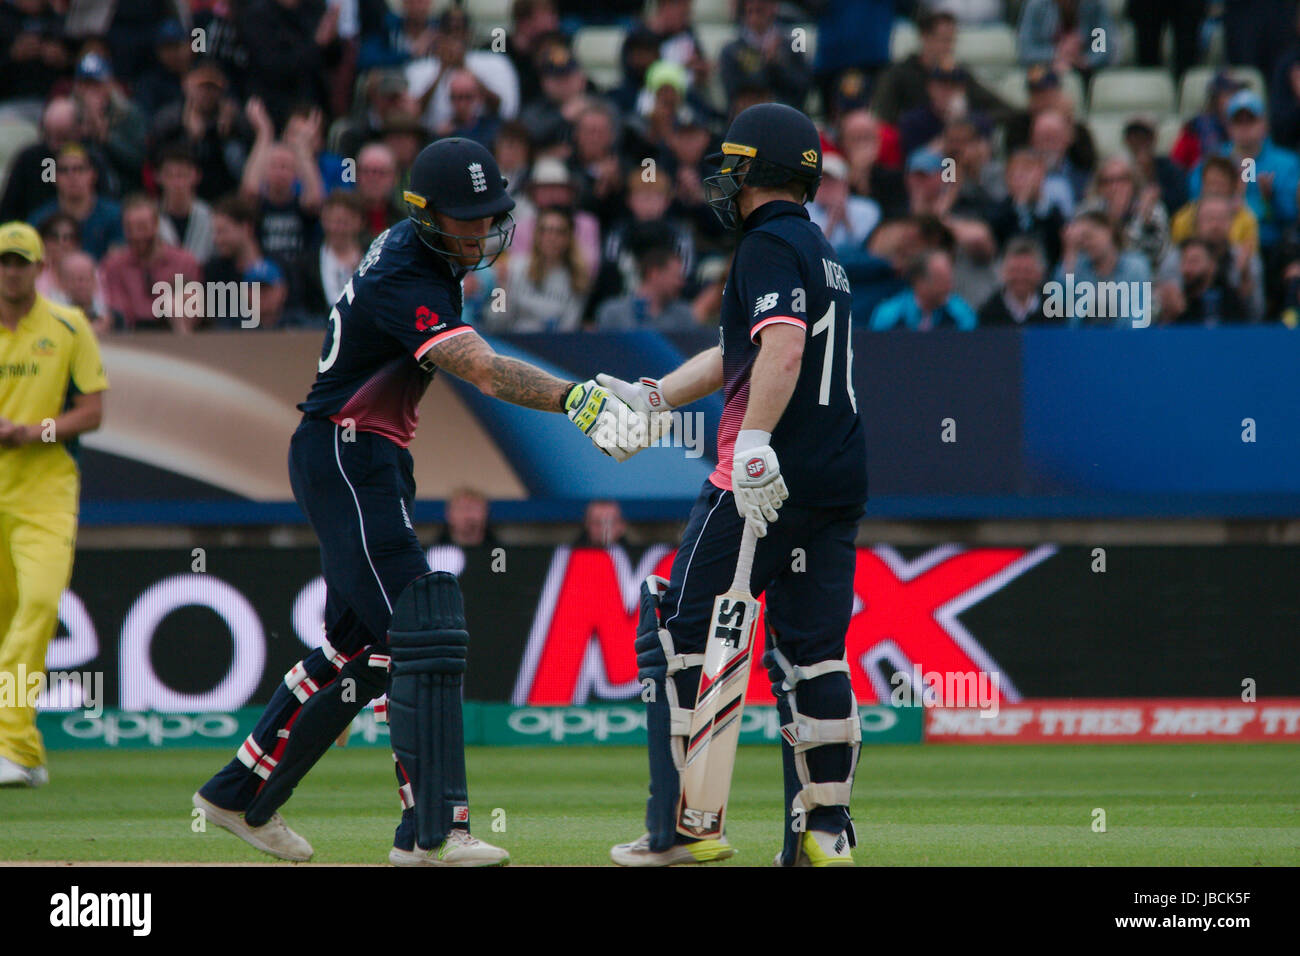 Birmingham, England, 10 June 2017. Ben Stokes, left, congratulating England Captain Eoin Morgan on reaching 50 runs against Australia in the ICC Champions Trophy Group A match at Edgbaston. Credit: Colin Edwards/Alamy Live News. Stock Photo